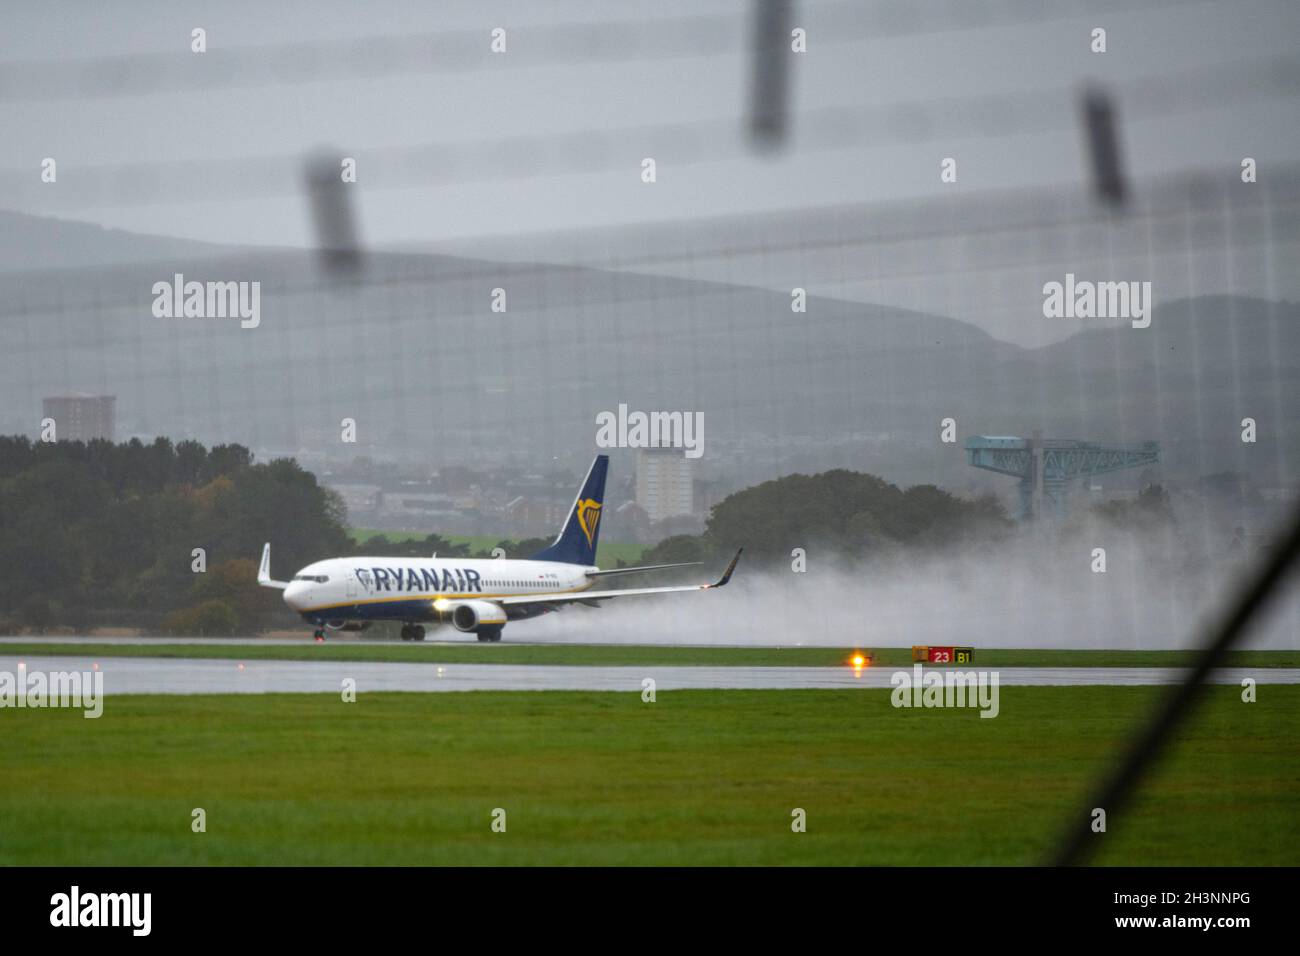 Glasgow, Scotland, UK. 29th Oct, 2021. PICTURED: A RyanAir Flight Boeing 737-800 leaving a trail of water, spray and cloud on the runway behind the departing aircraft taking off on a wet runway. Glasgow Airport seen 2 days before the start of the COP26 Climate Change Conference. The airport has hired in a private security company where the public can see security people stationed at every gate in high viz, along with Royal Air Force helicopters stationed for use at the climate summit along with flights arriving and departing on a wet and windy afternoon. Credit: Colin Fisher/Alamy Live News Stock Photo